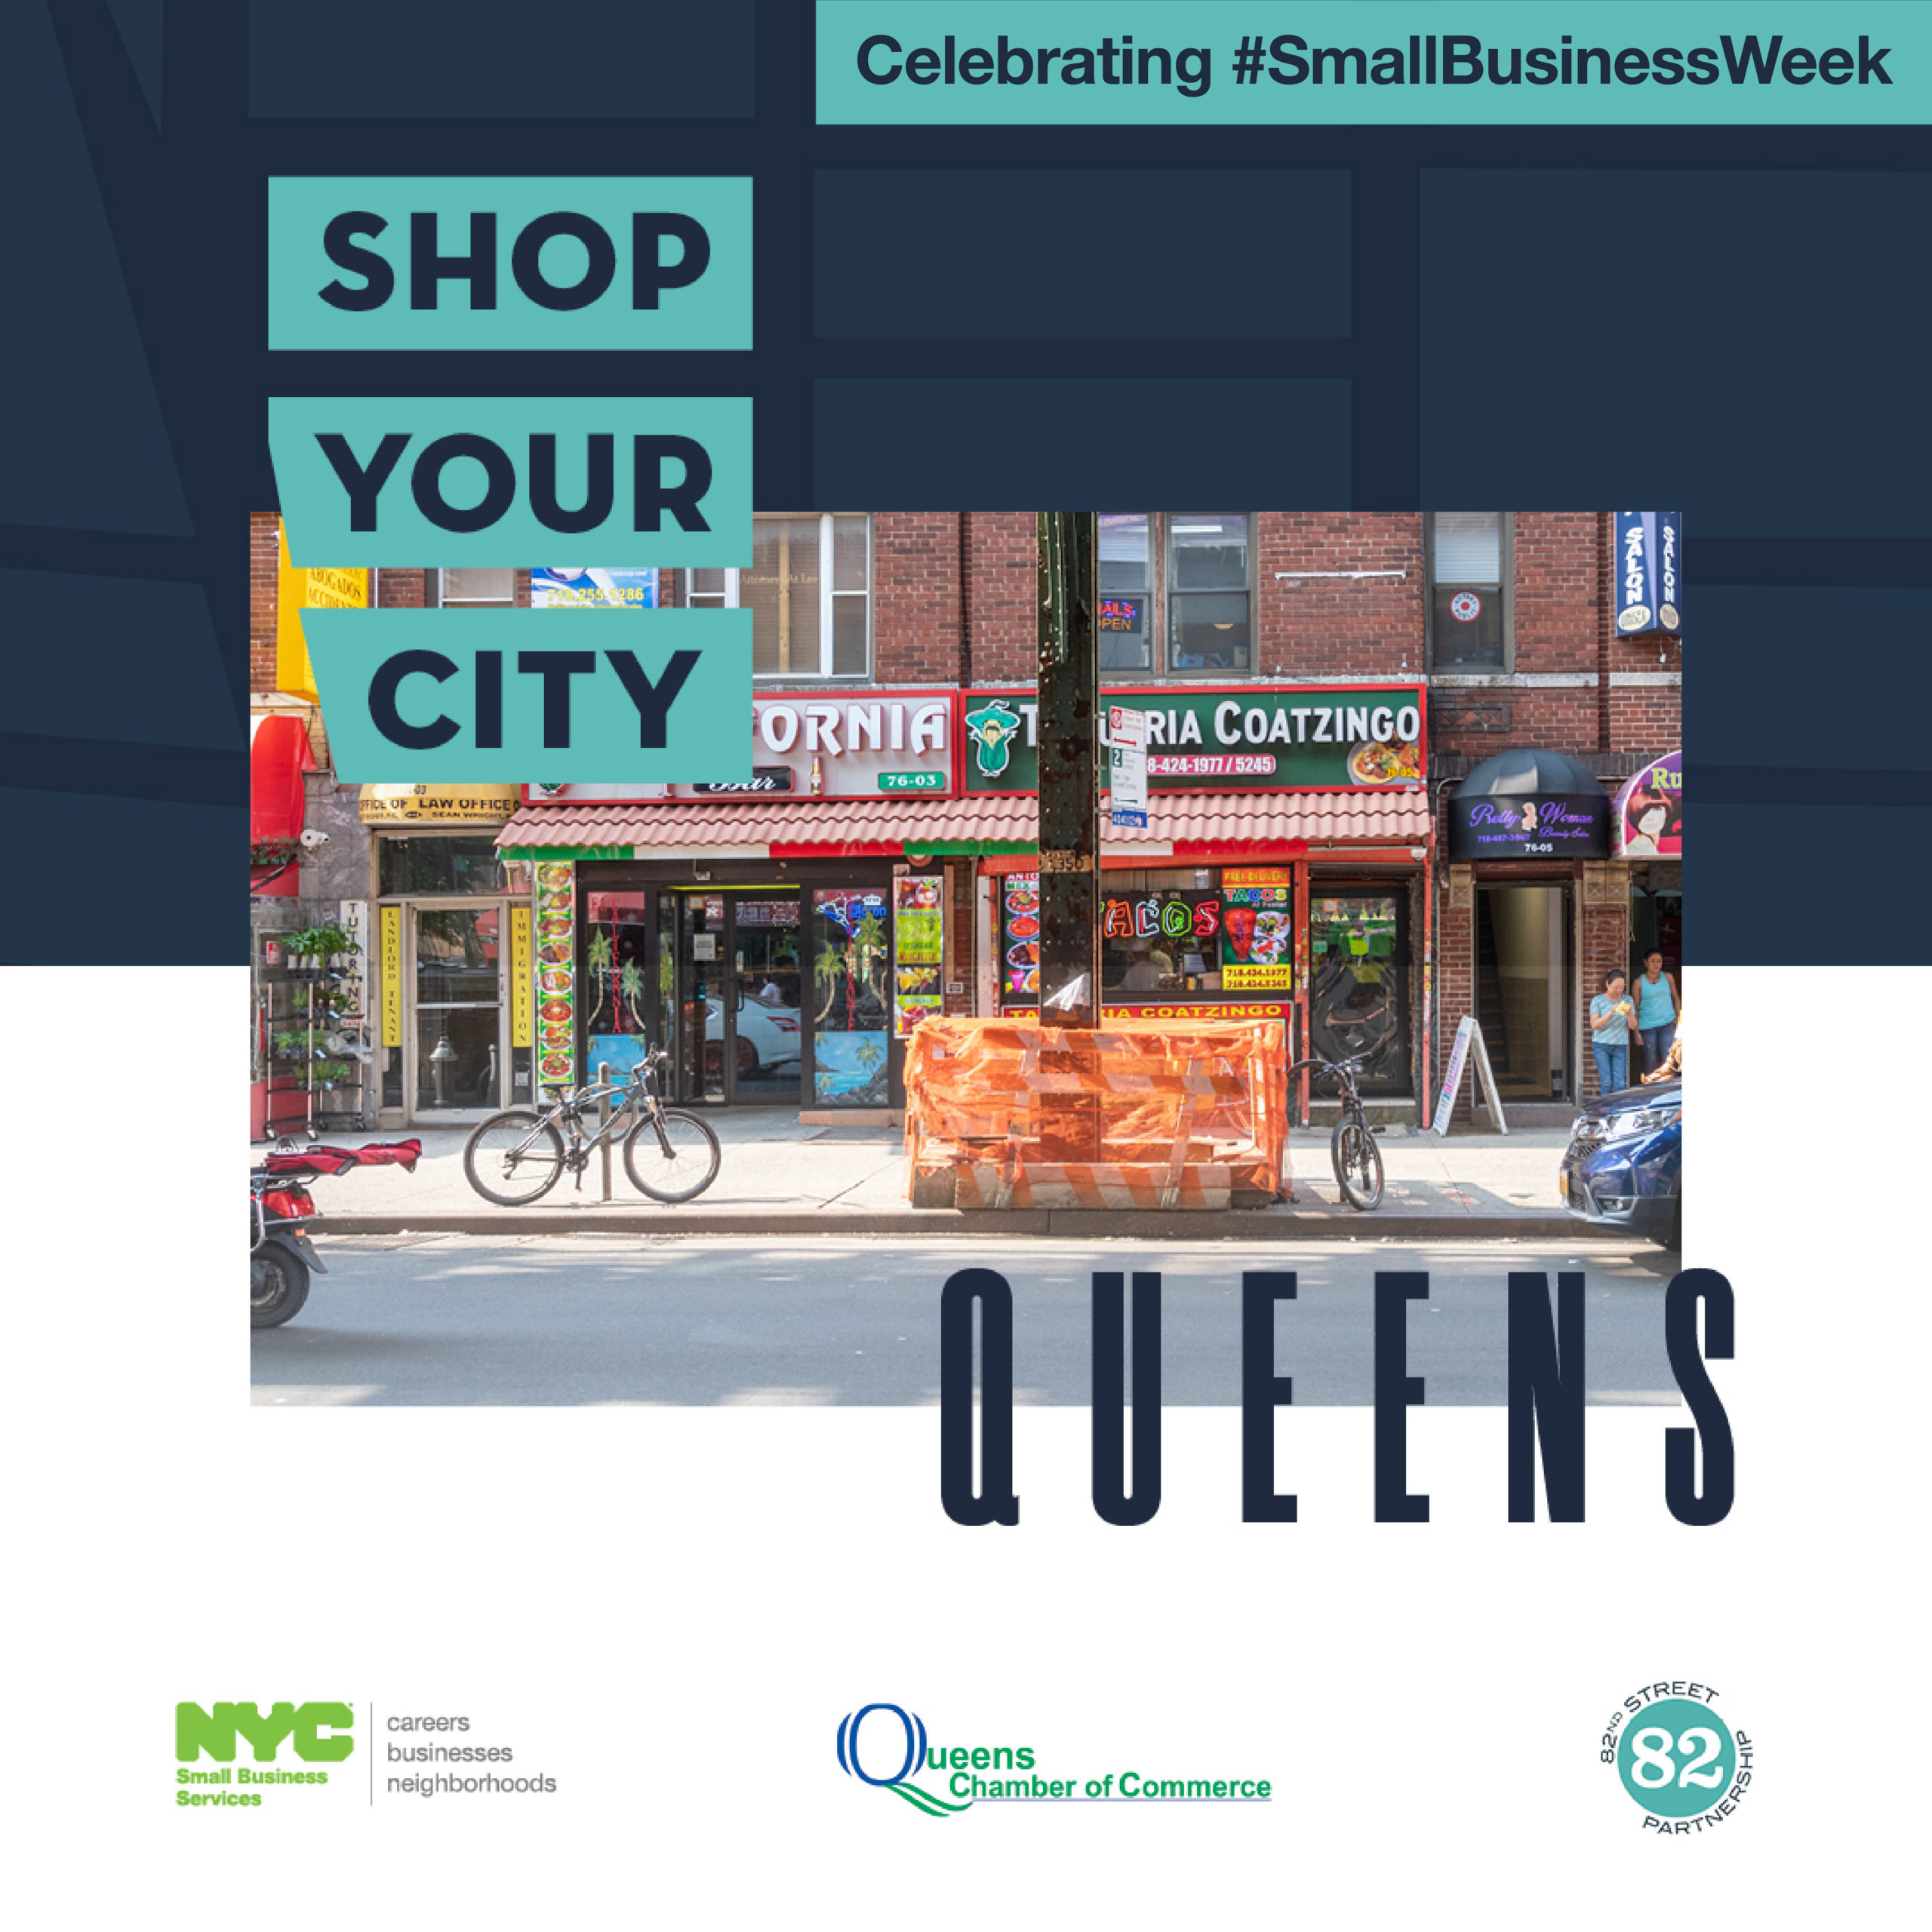 Commercial corridor on Roosevelt Avenue in Queens with Shop Your City Queens text and SBS and partner logos